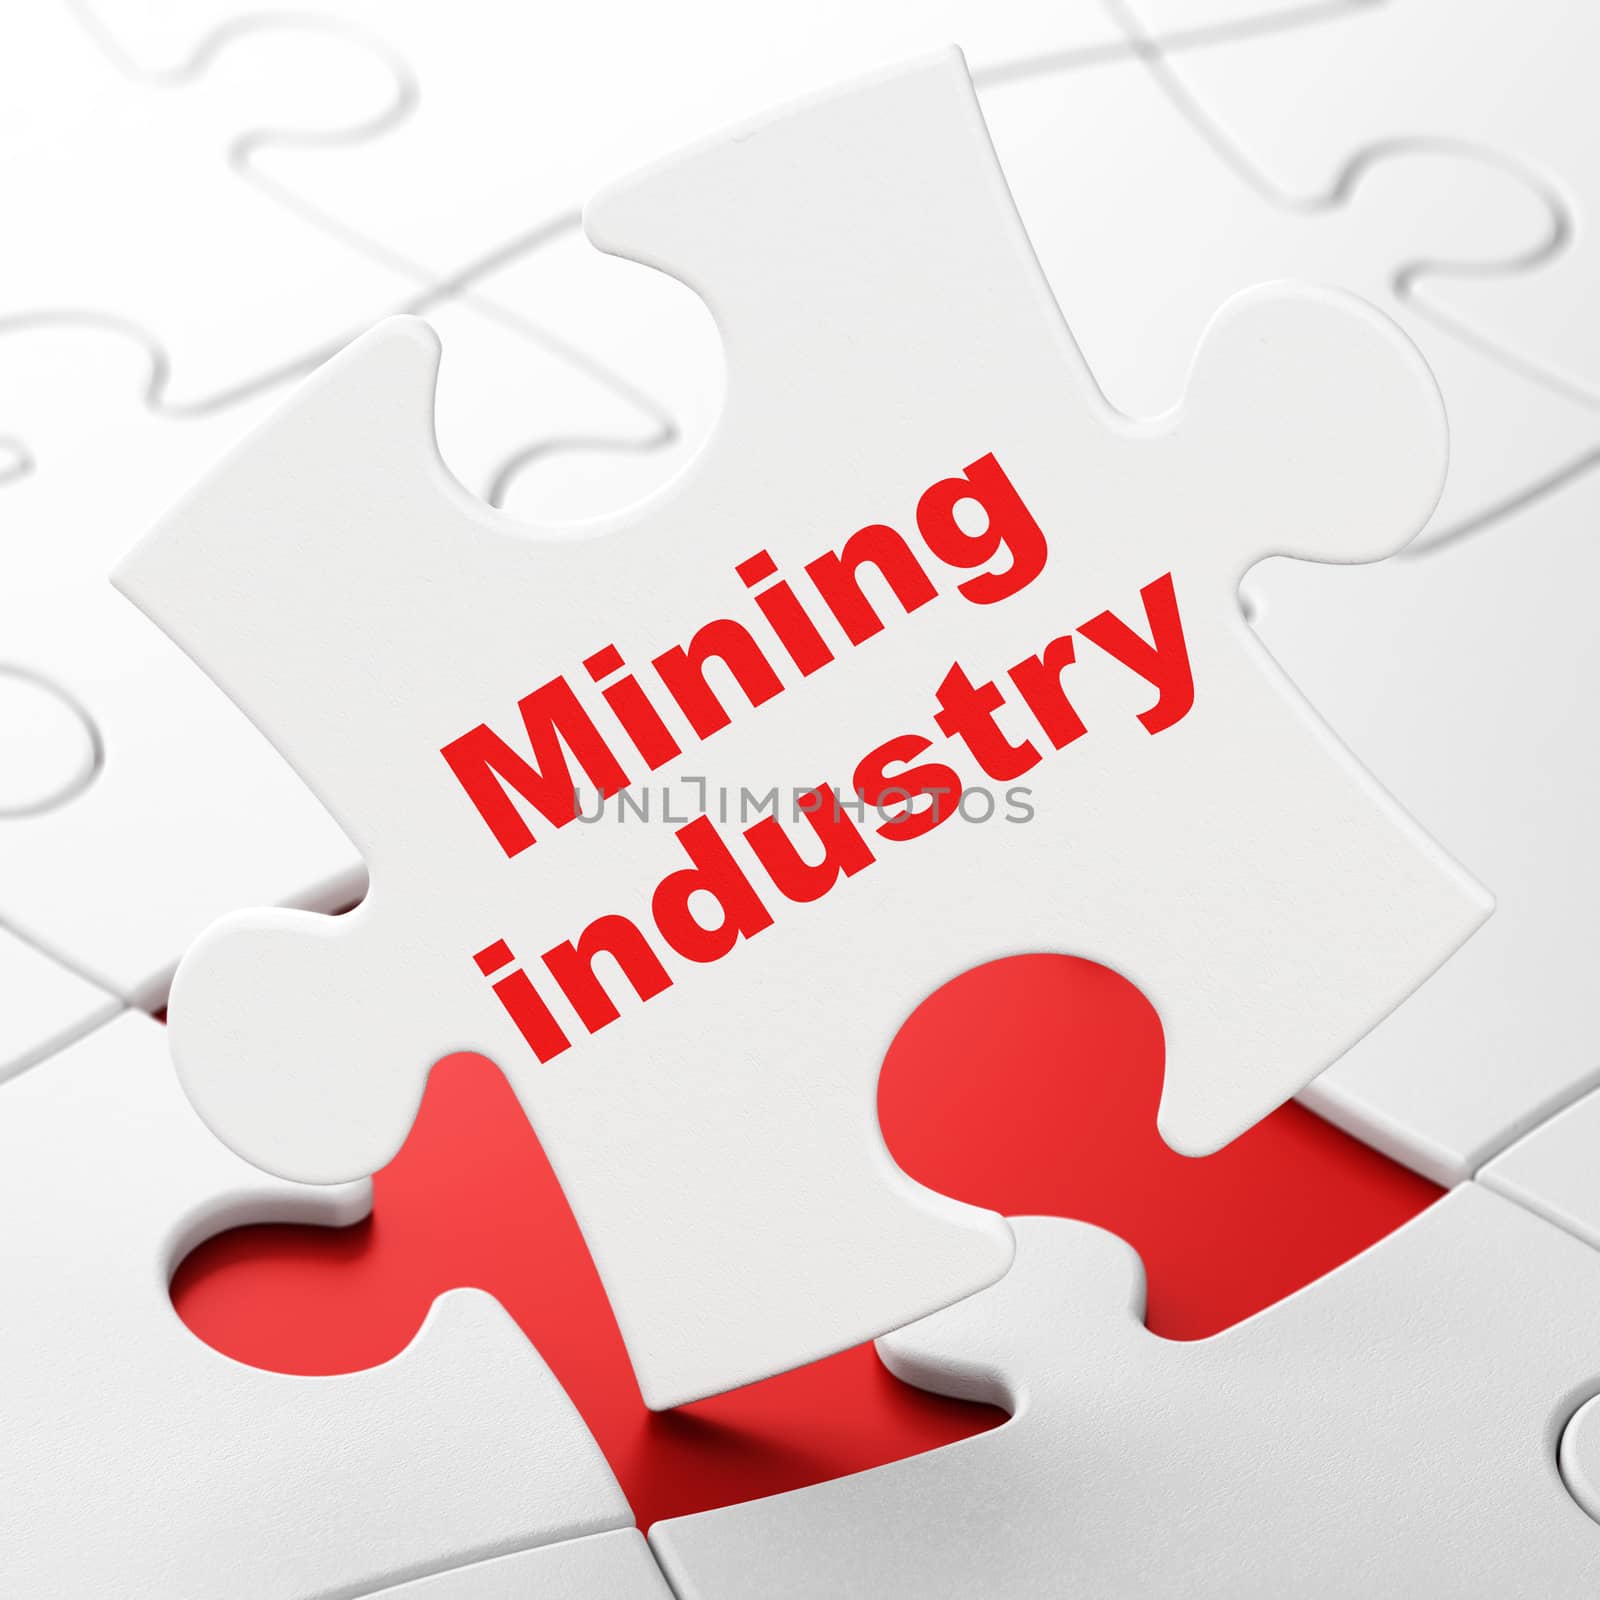 Manufacuring concept: Mining Industry on puzzle background by maxkabakov